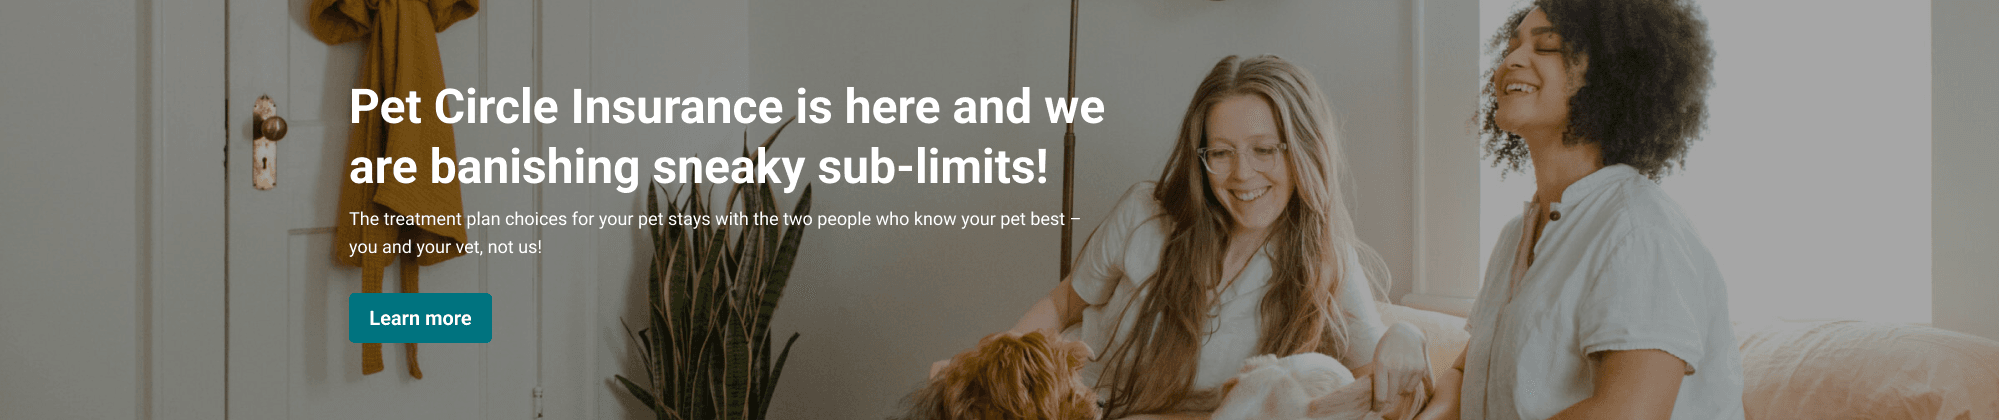 Pet Circle Insurance is here and we are banishing sneaky sub-limits!